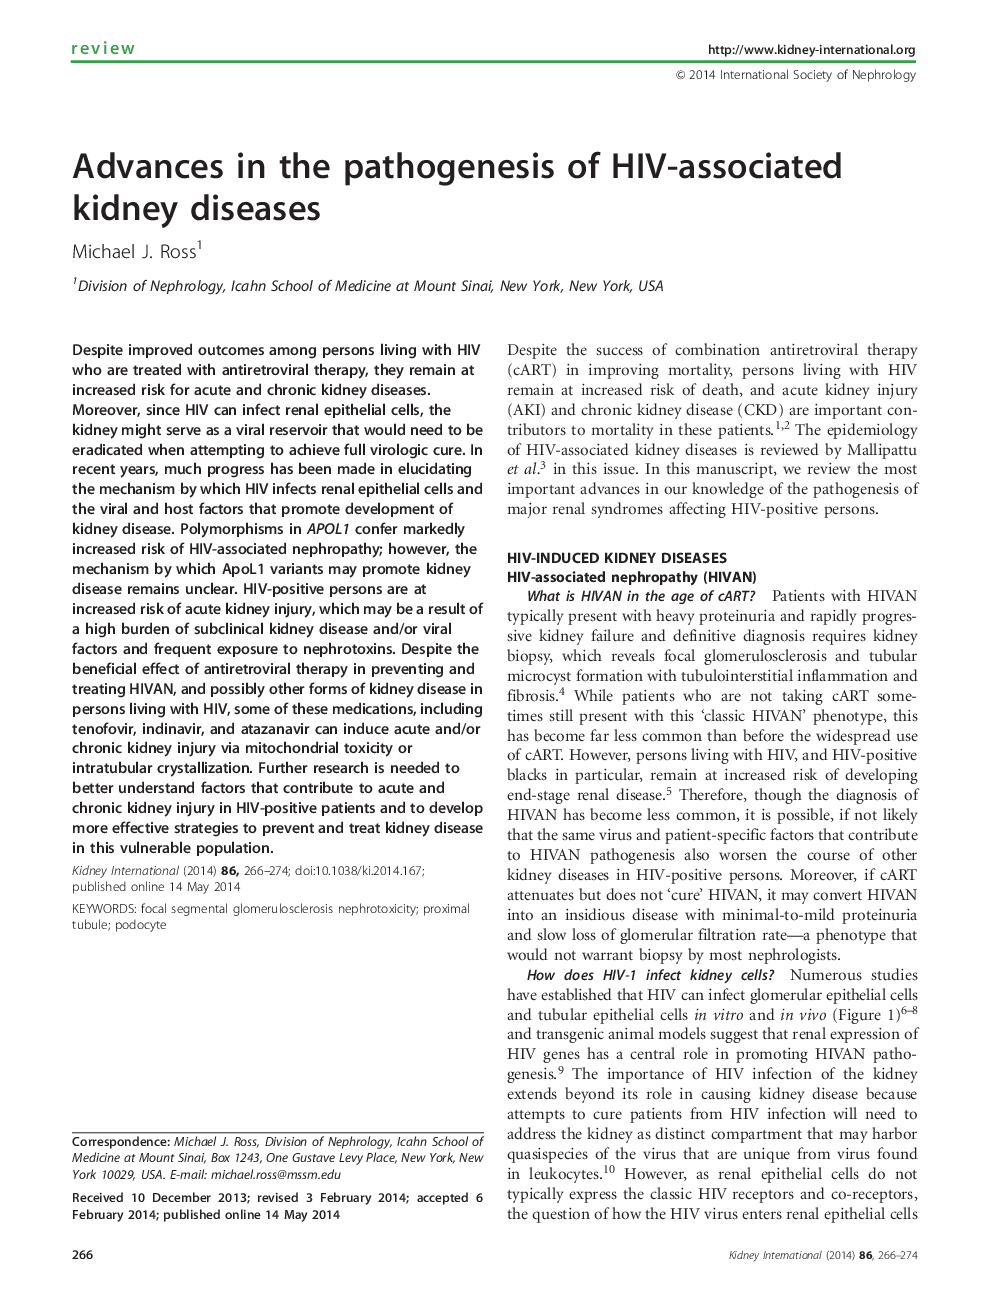 Advances in the pathogenesis of HIV-associated kidney diseases